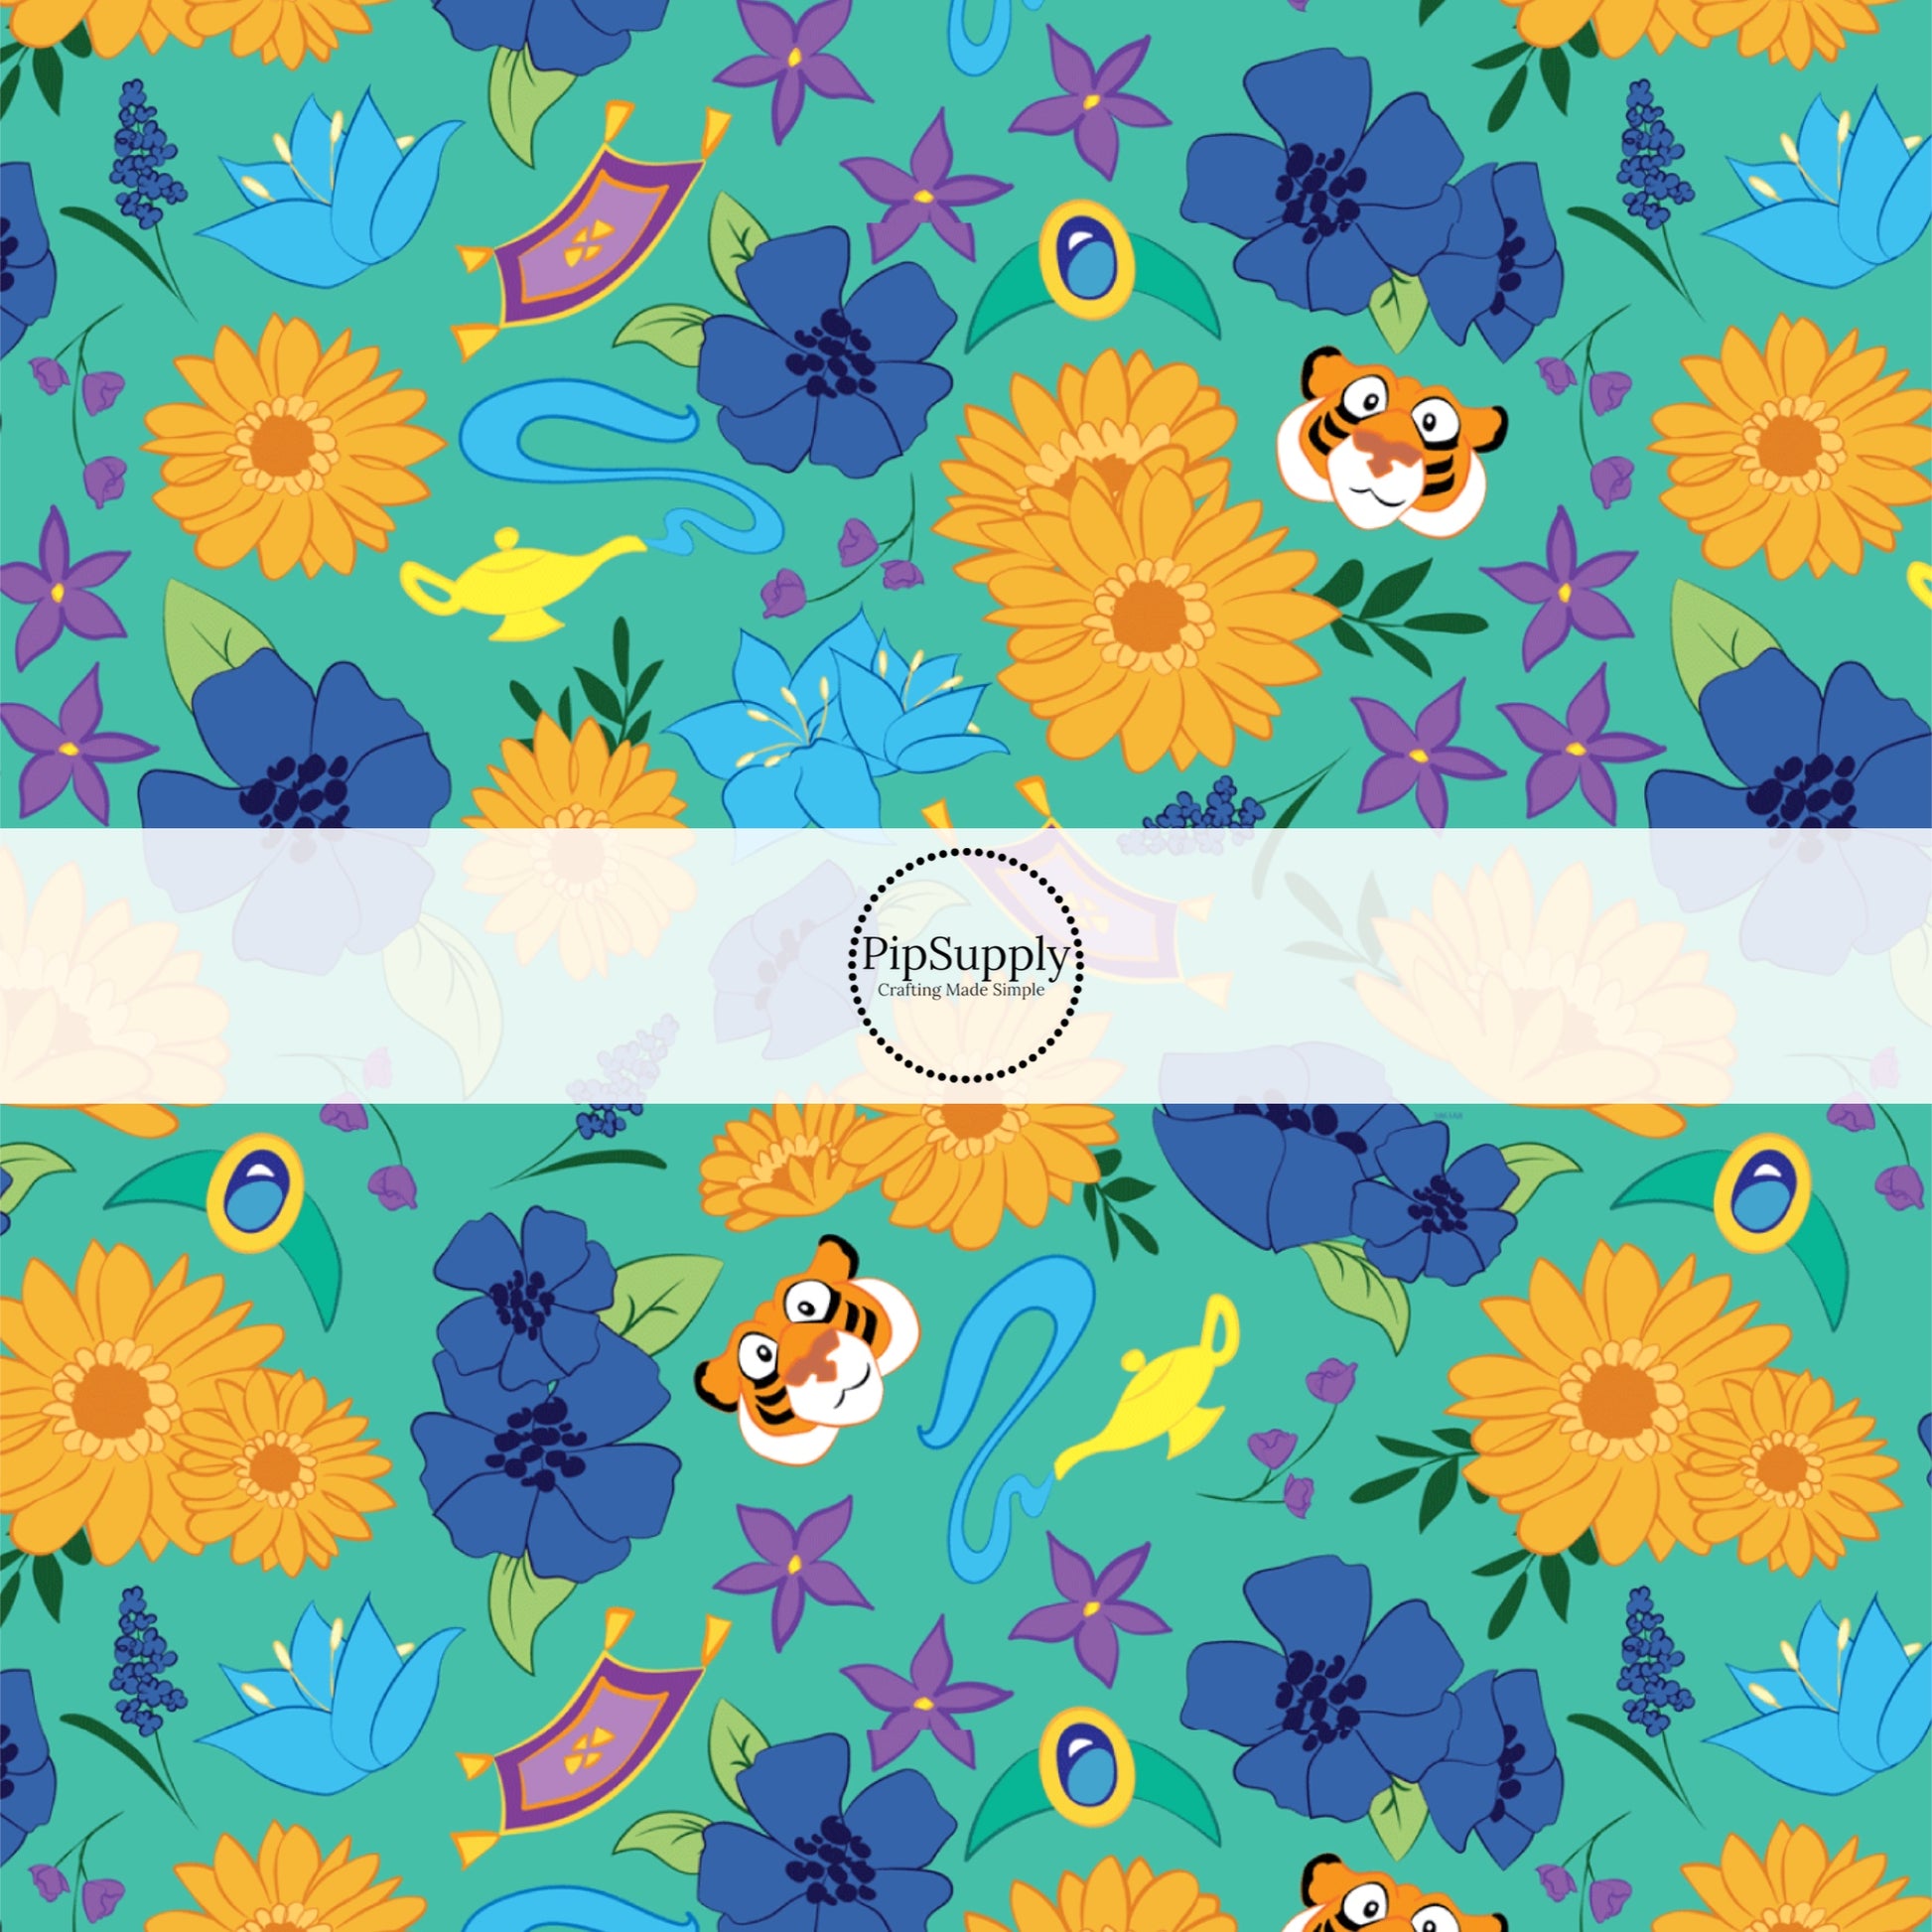 Teal princess fabric by the yard with tigers, florals, genies, and flying carpets.